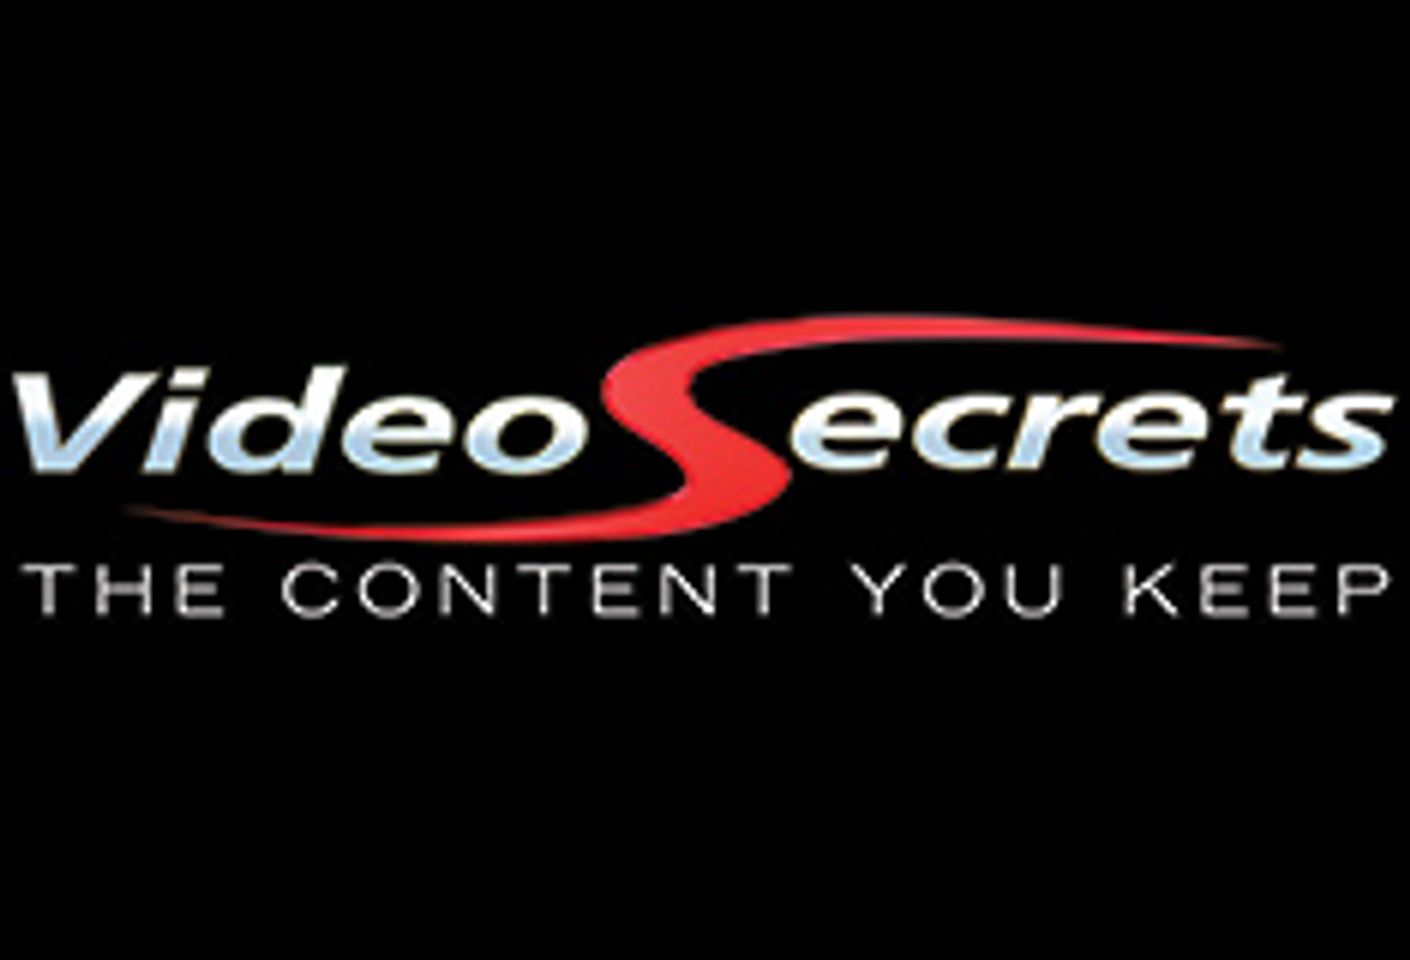 Video Secrets Showers Performers with Money this Valentine's Day Weekend